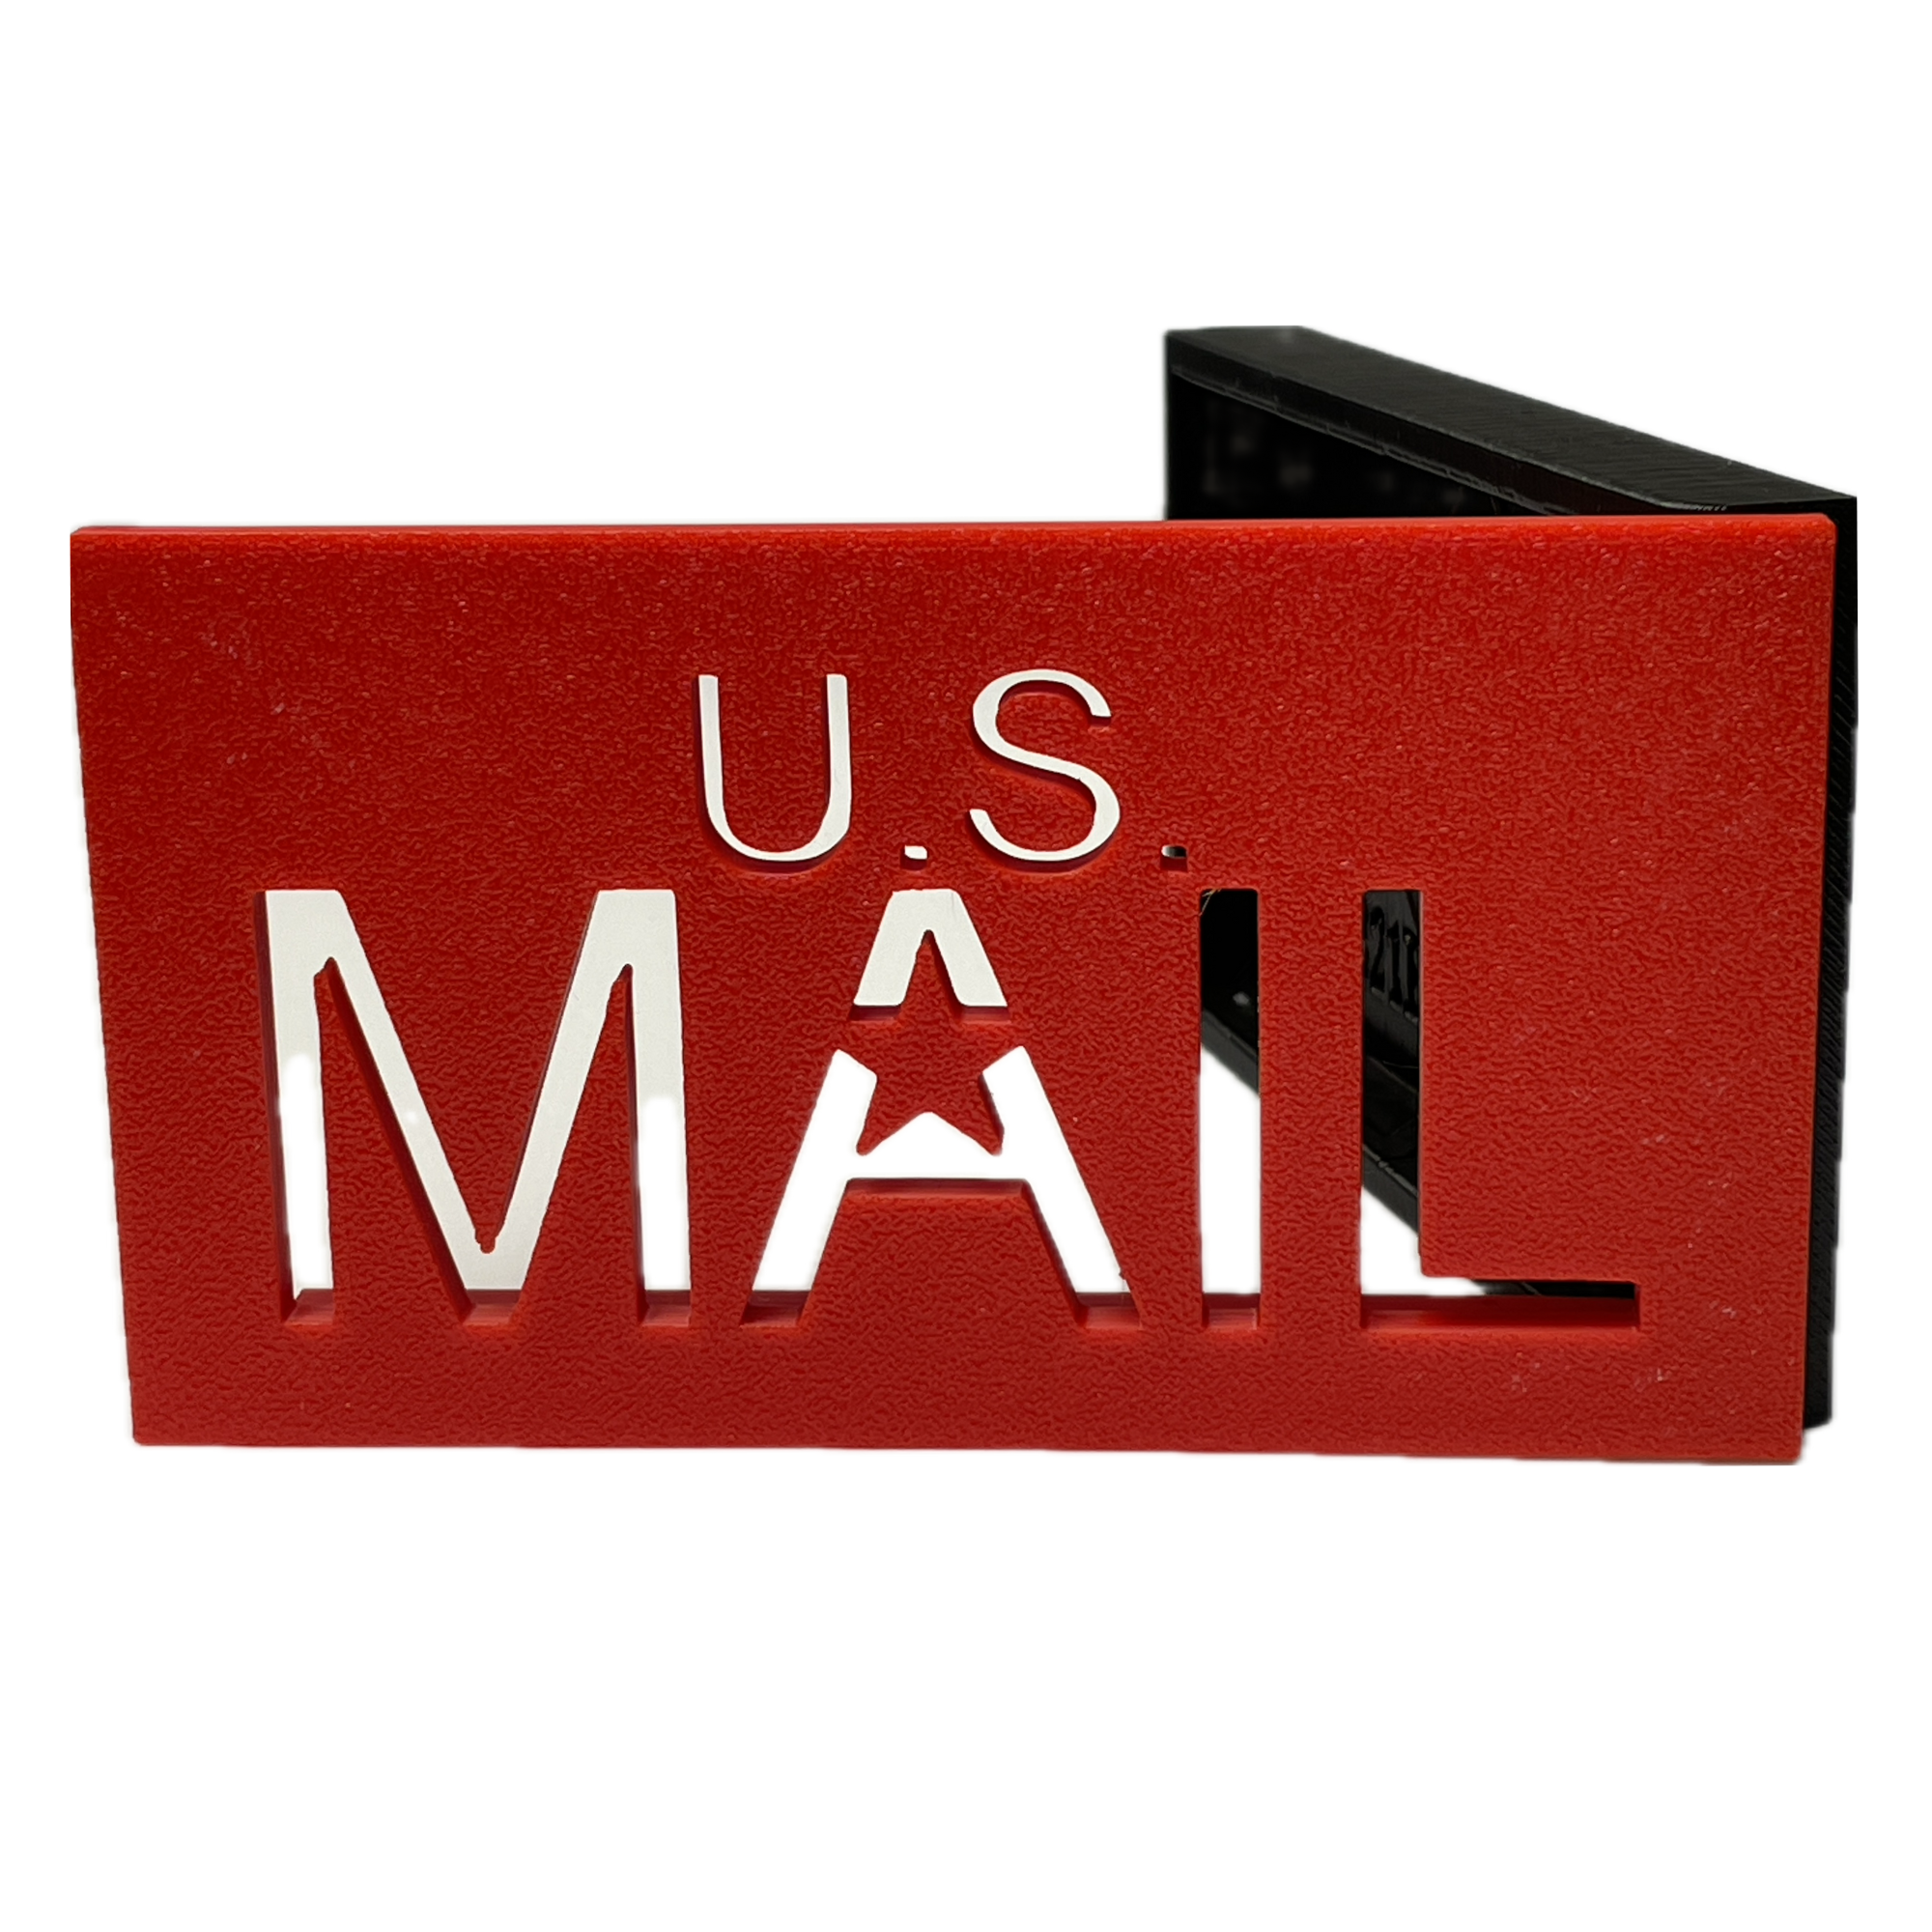 US Mail mailbox flag for brick or stone mailboxes product picture on a white background.